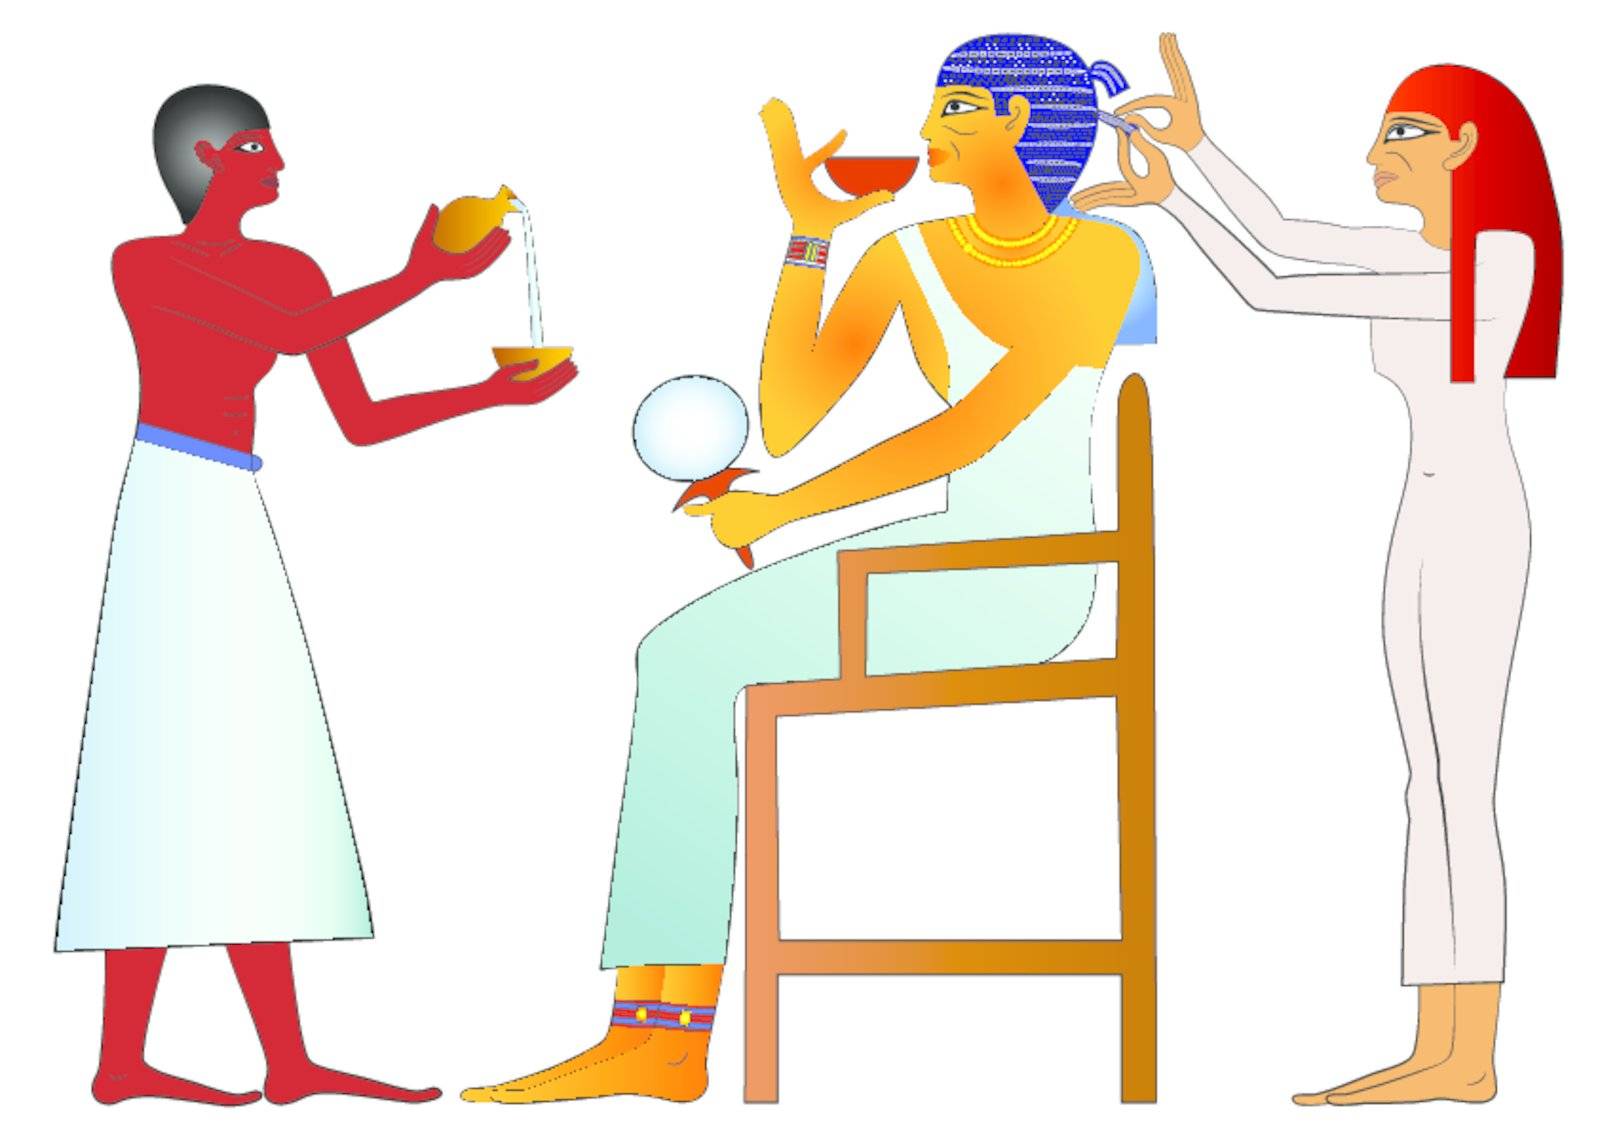 Image of the hairdresser of ancient Egypt